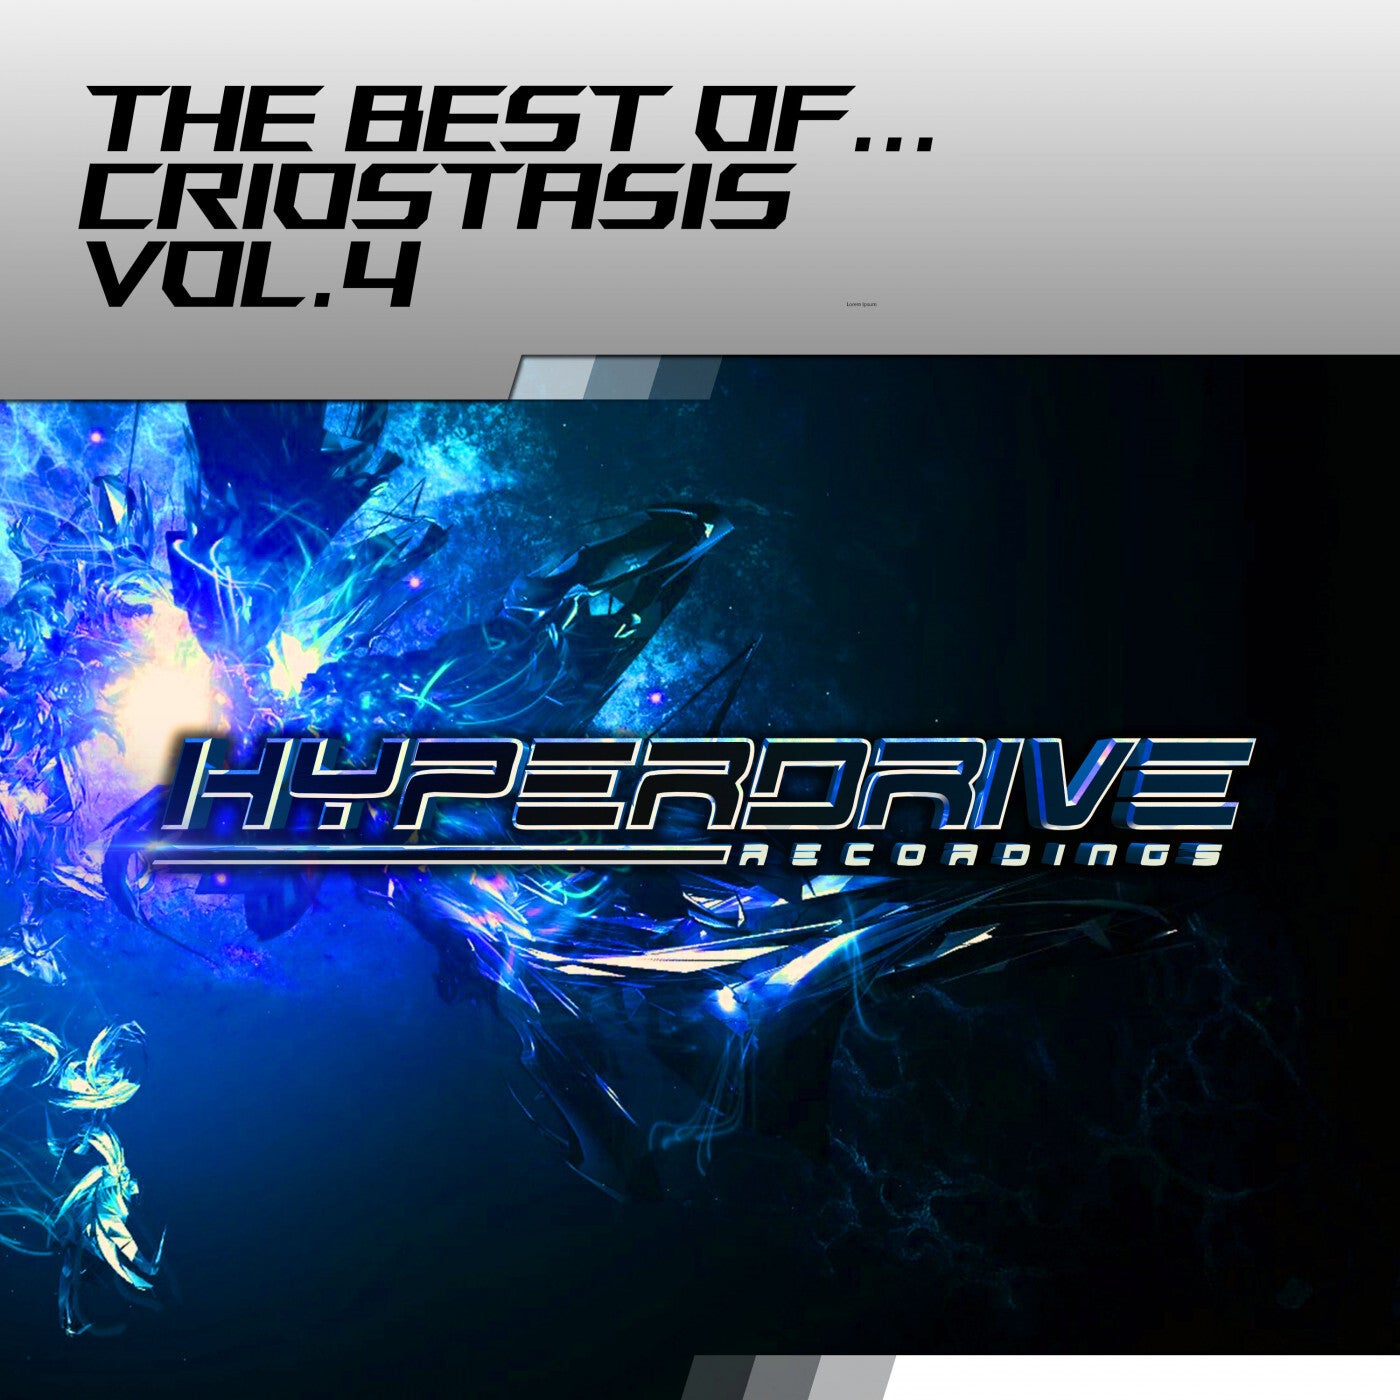 The Best Of Criostasis vol.4